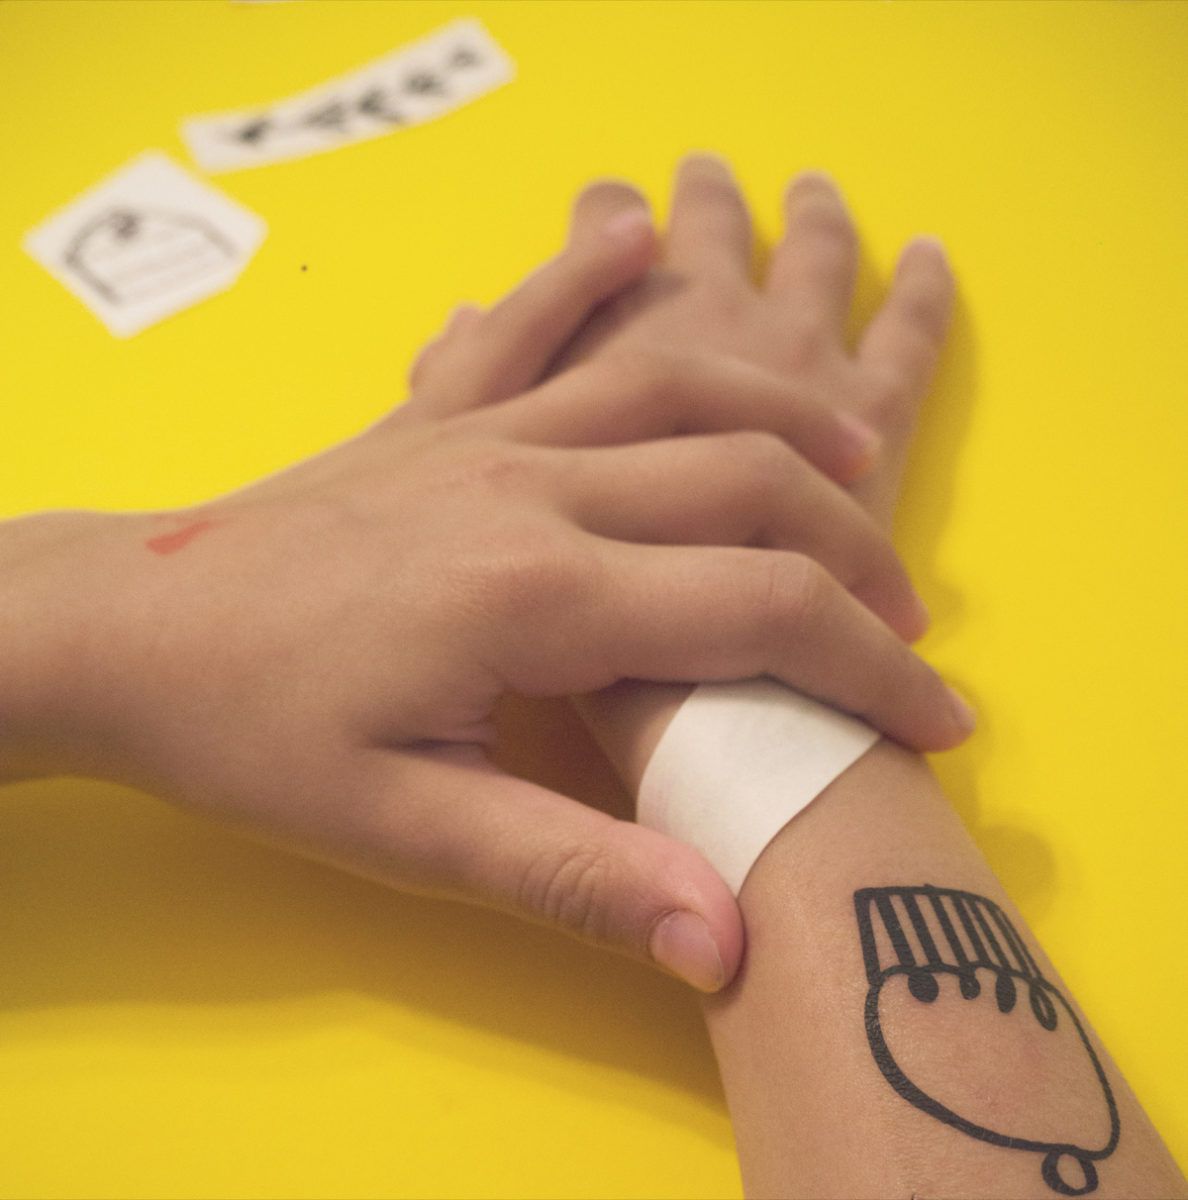 Make Your Own Temporary Tattoos